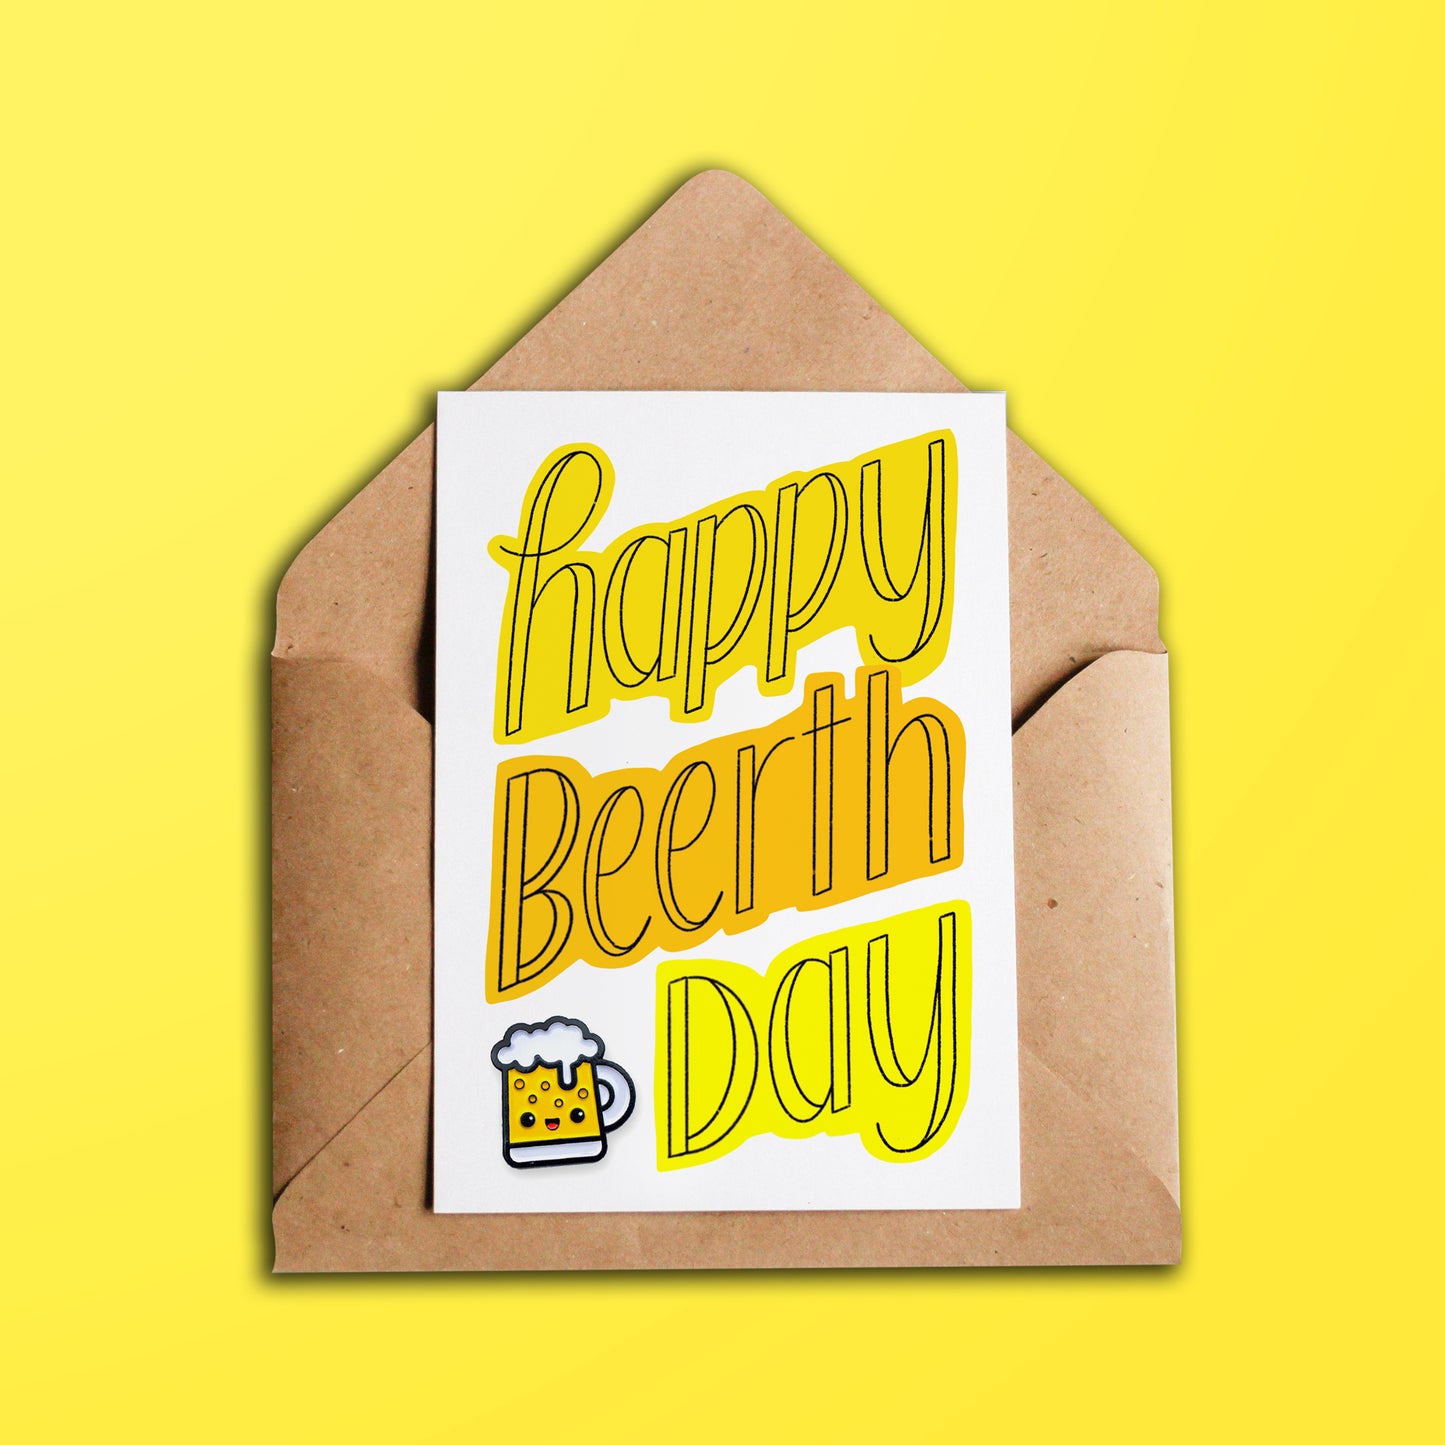 Happy Beerthday greeting card over kraft brown envelope on yellow background